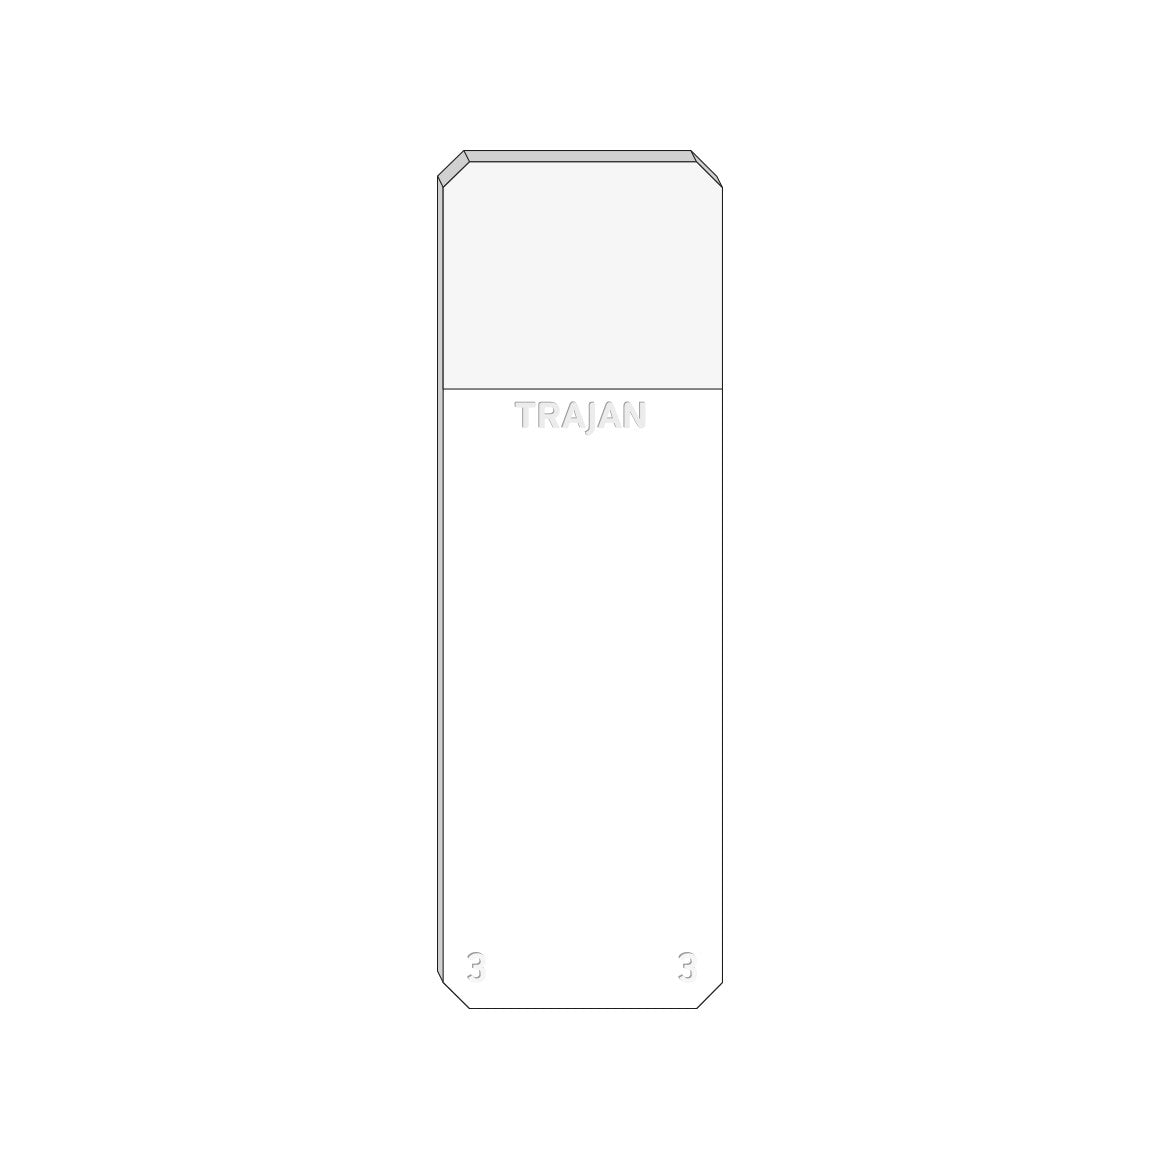 Trajan Scientific and Medical, Series 3 Adhesive Microscope Slides, White, Frost 20 mm, 75 mm x 25 mm